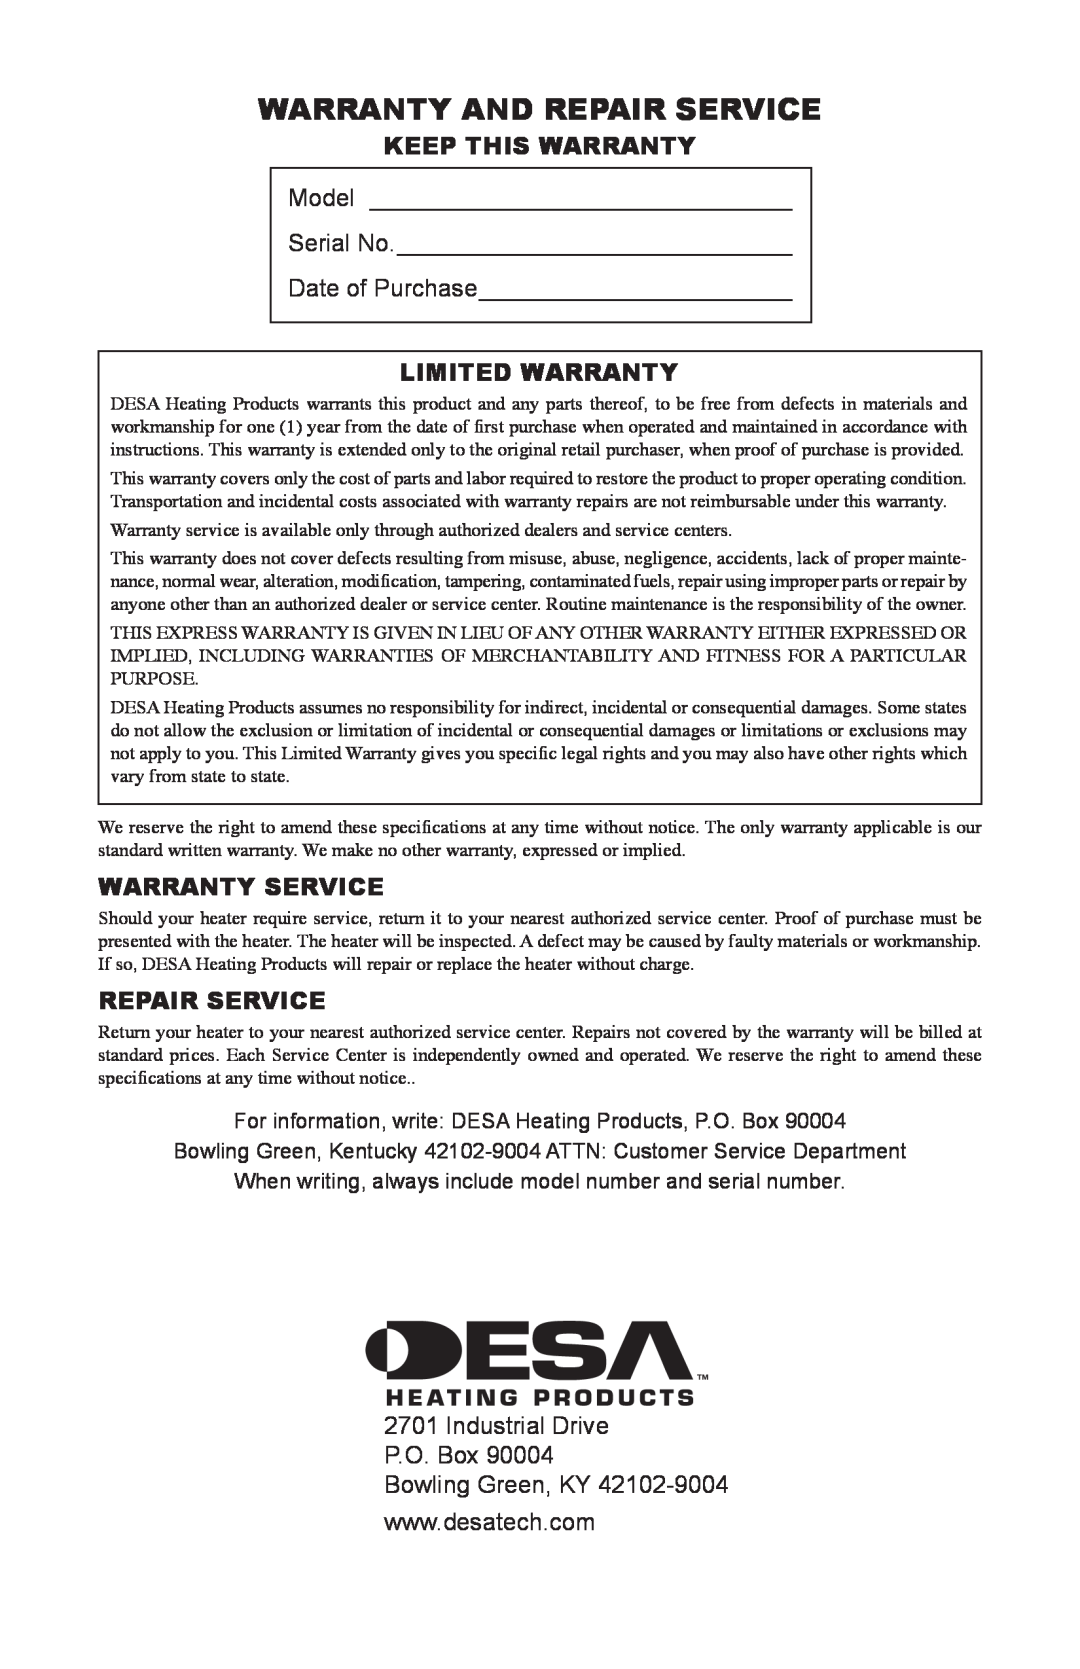 Desa RLP100 Warranty And Repair Service, Keep This Warranty, Model, Serial No, Date of Purchase, Limited Warranty 